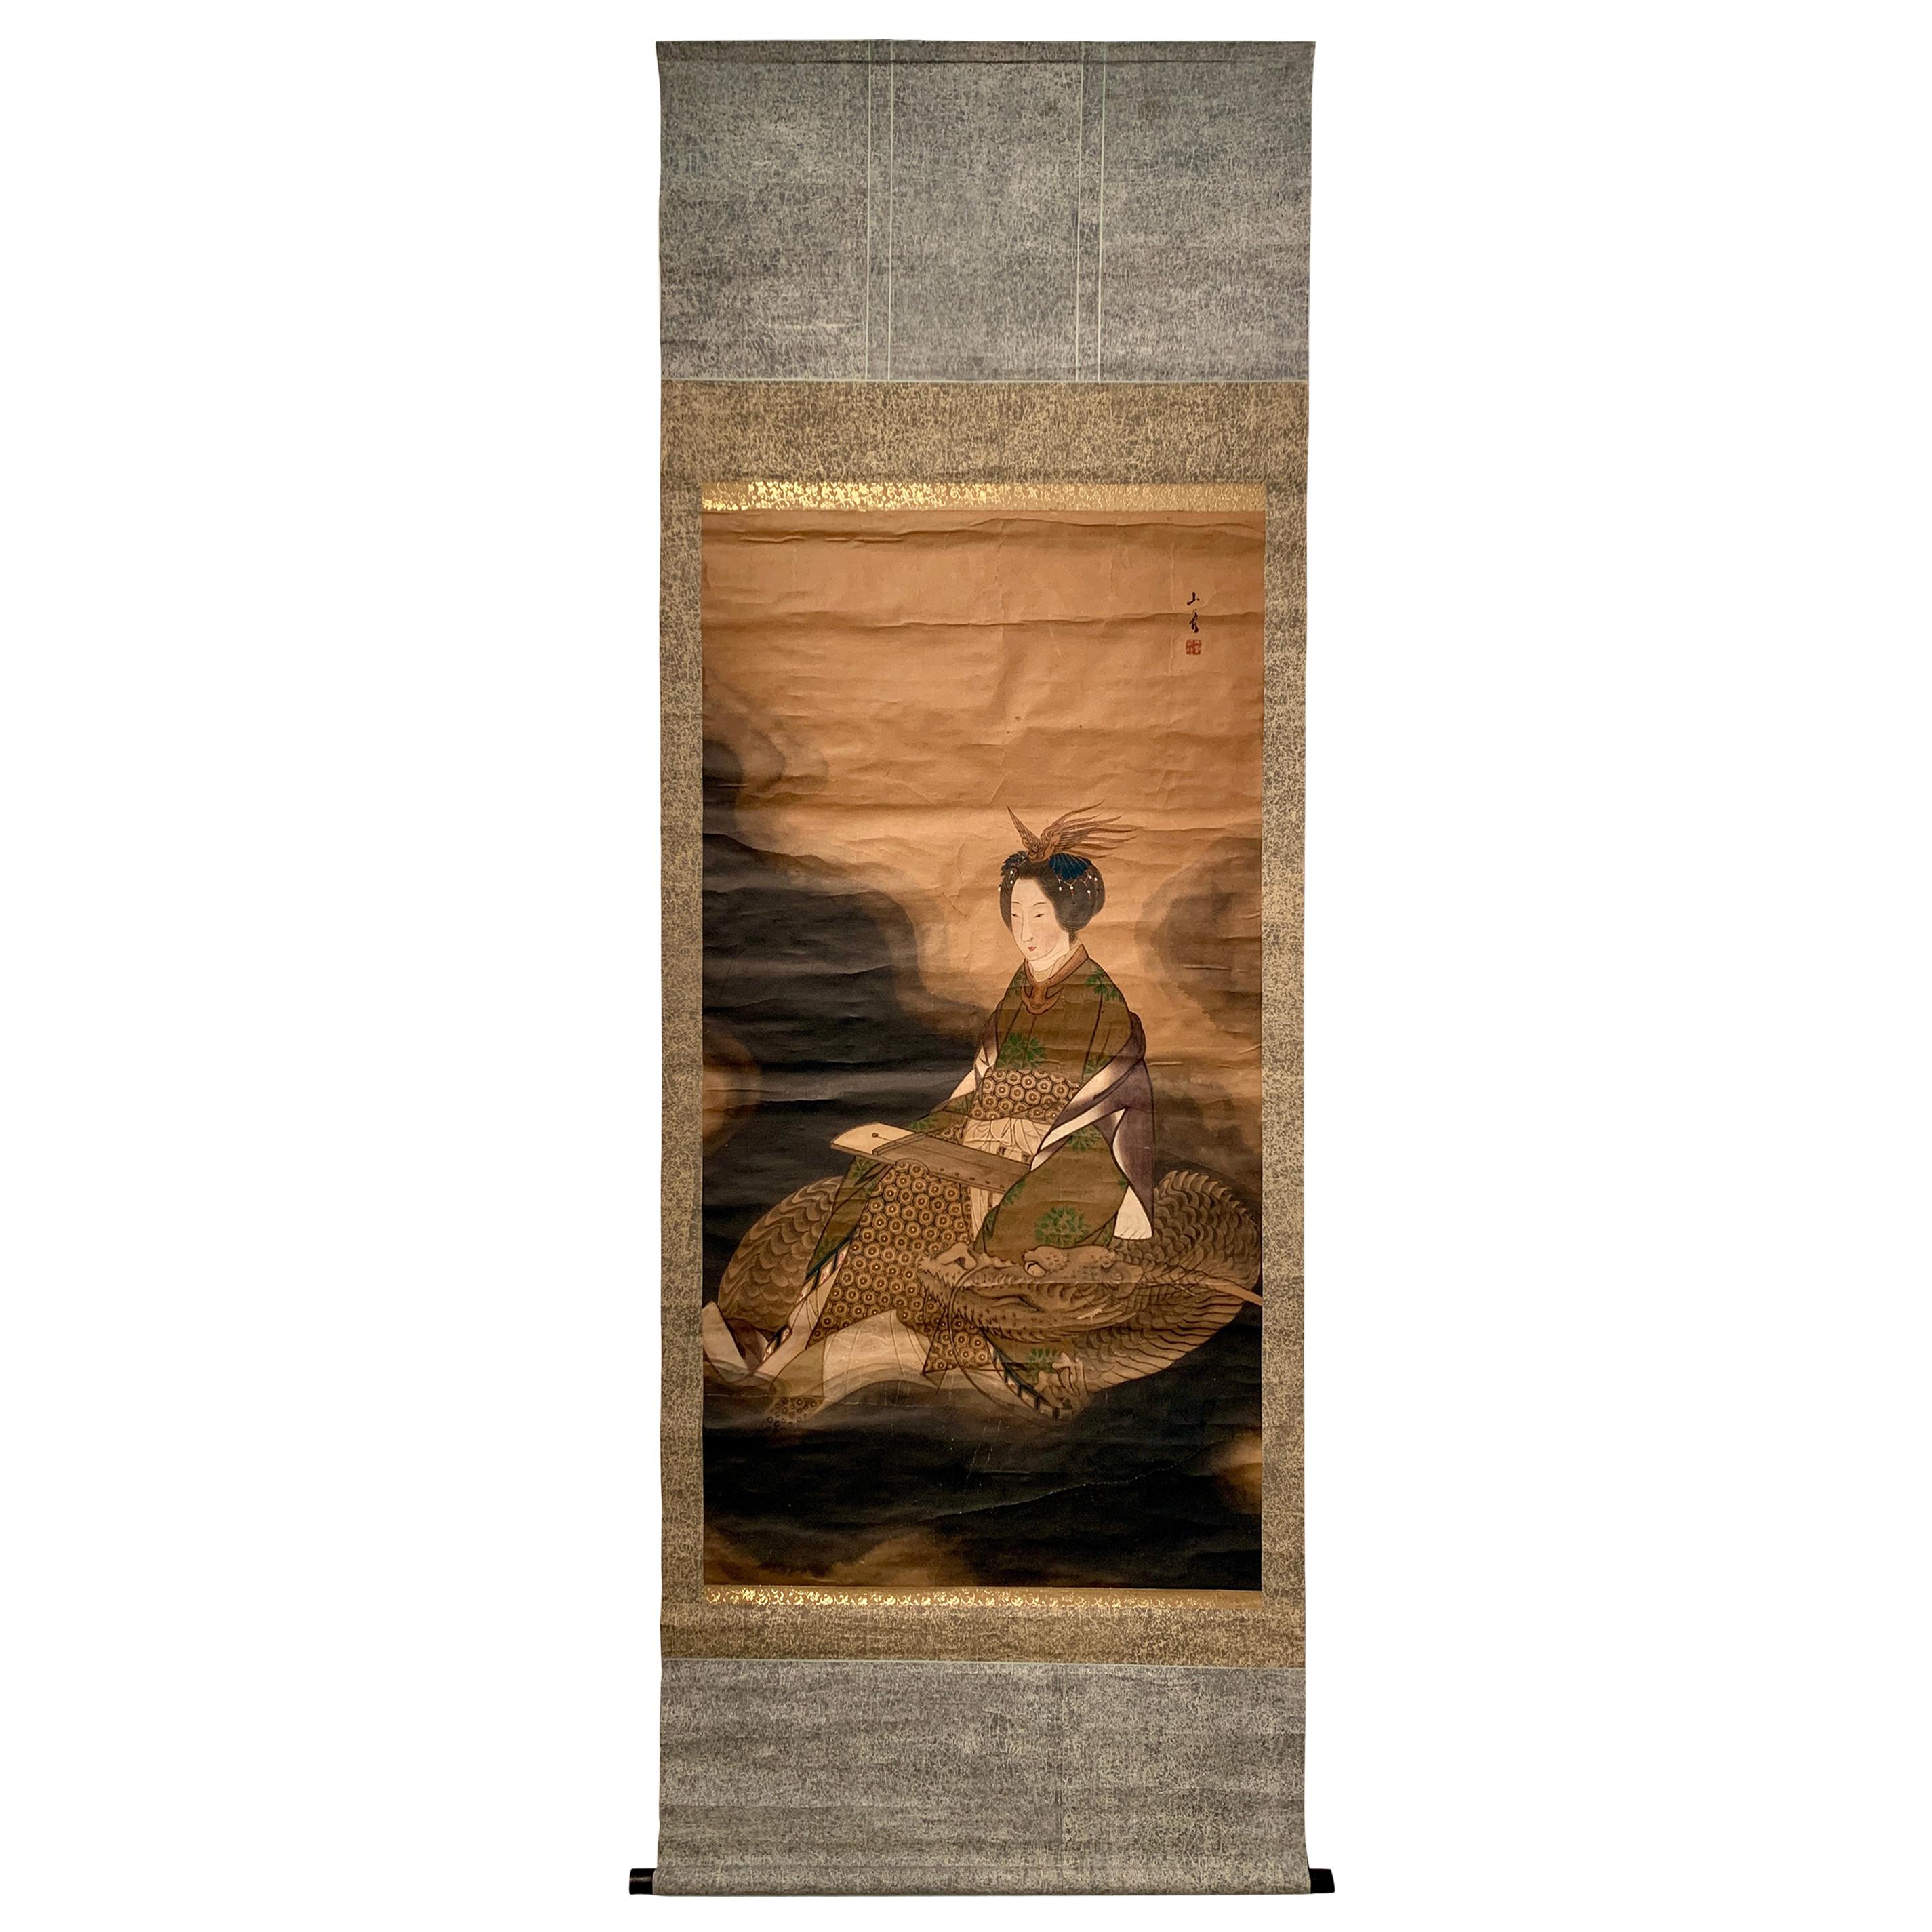 Japanese Scroll Painting "Dragon Lady" Benzaiten, Taisho Period, Early 20th C